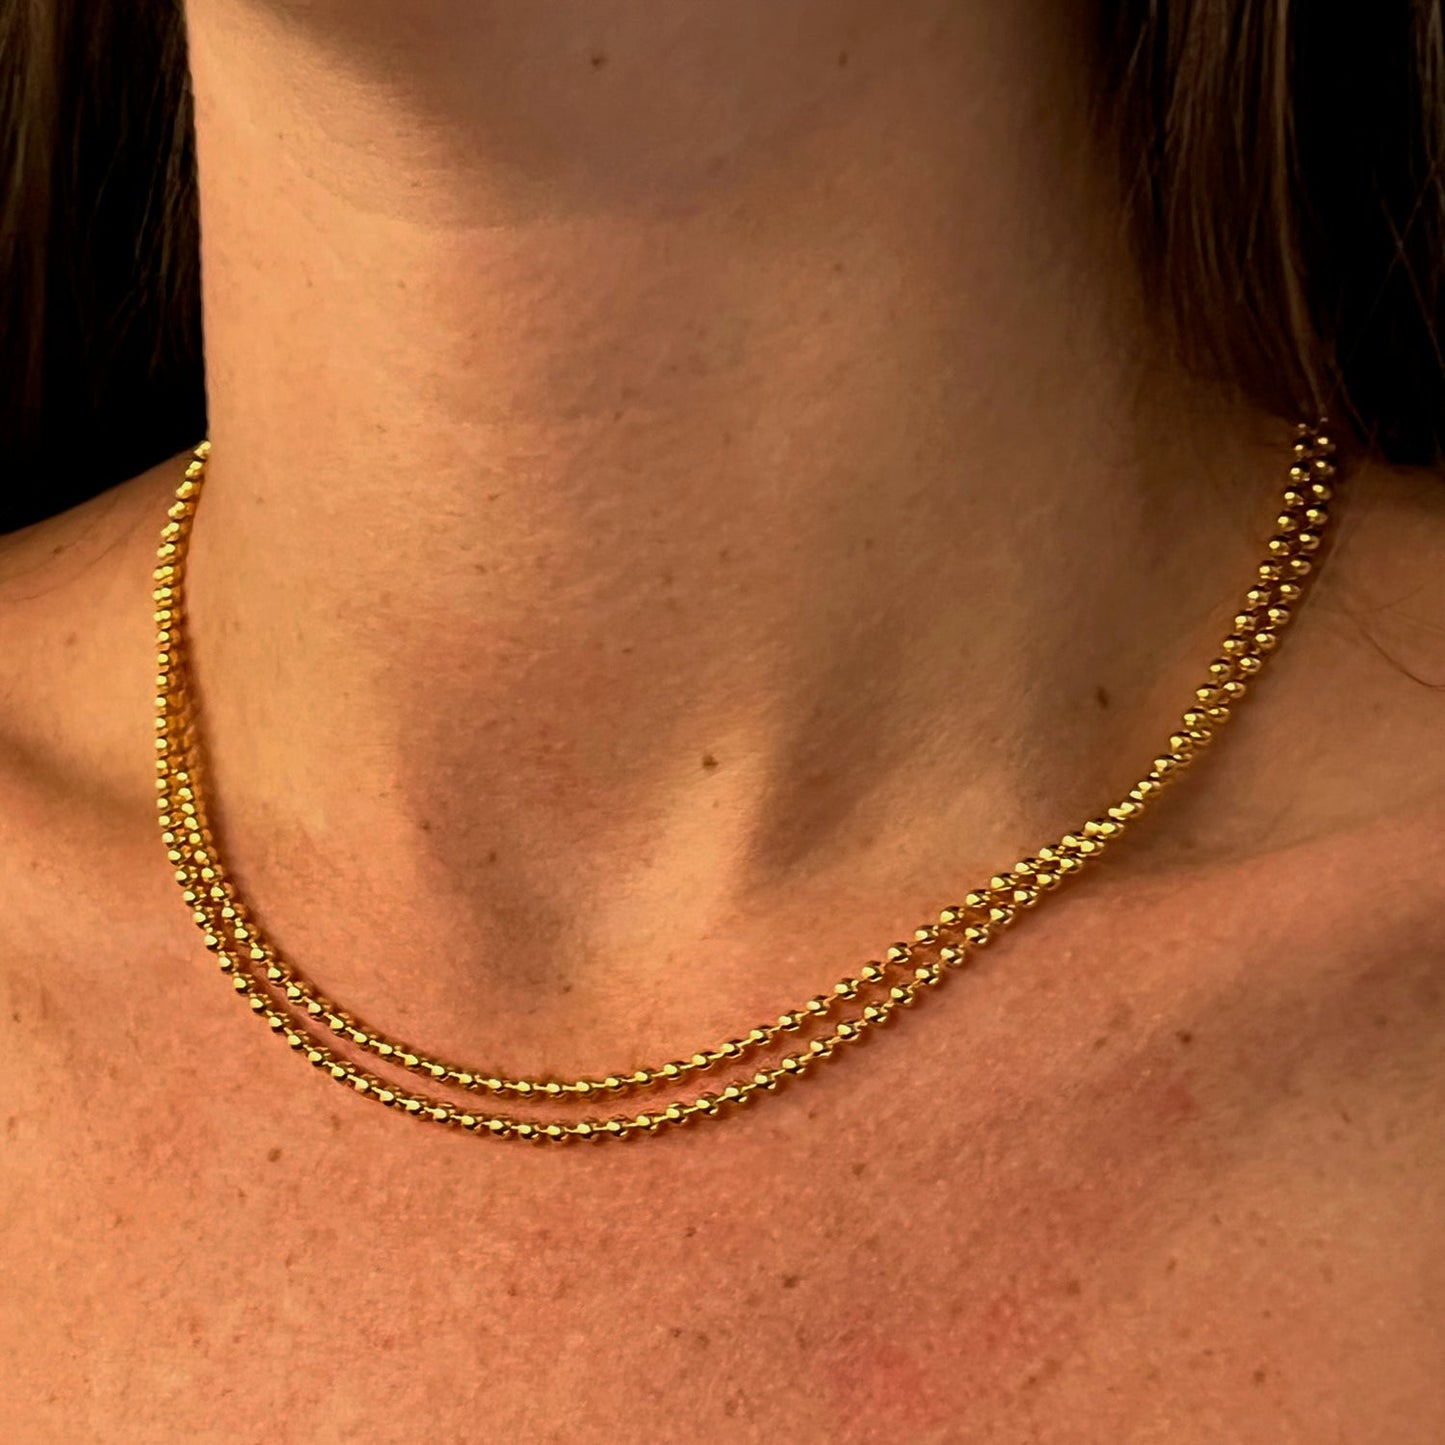 The Round Bead Chain Necklace